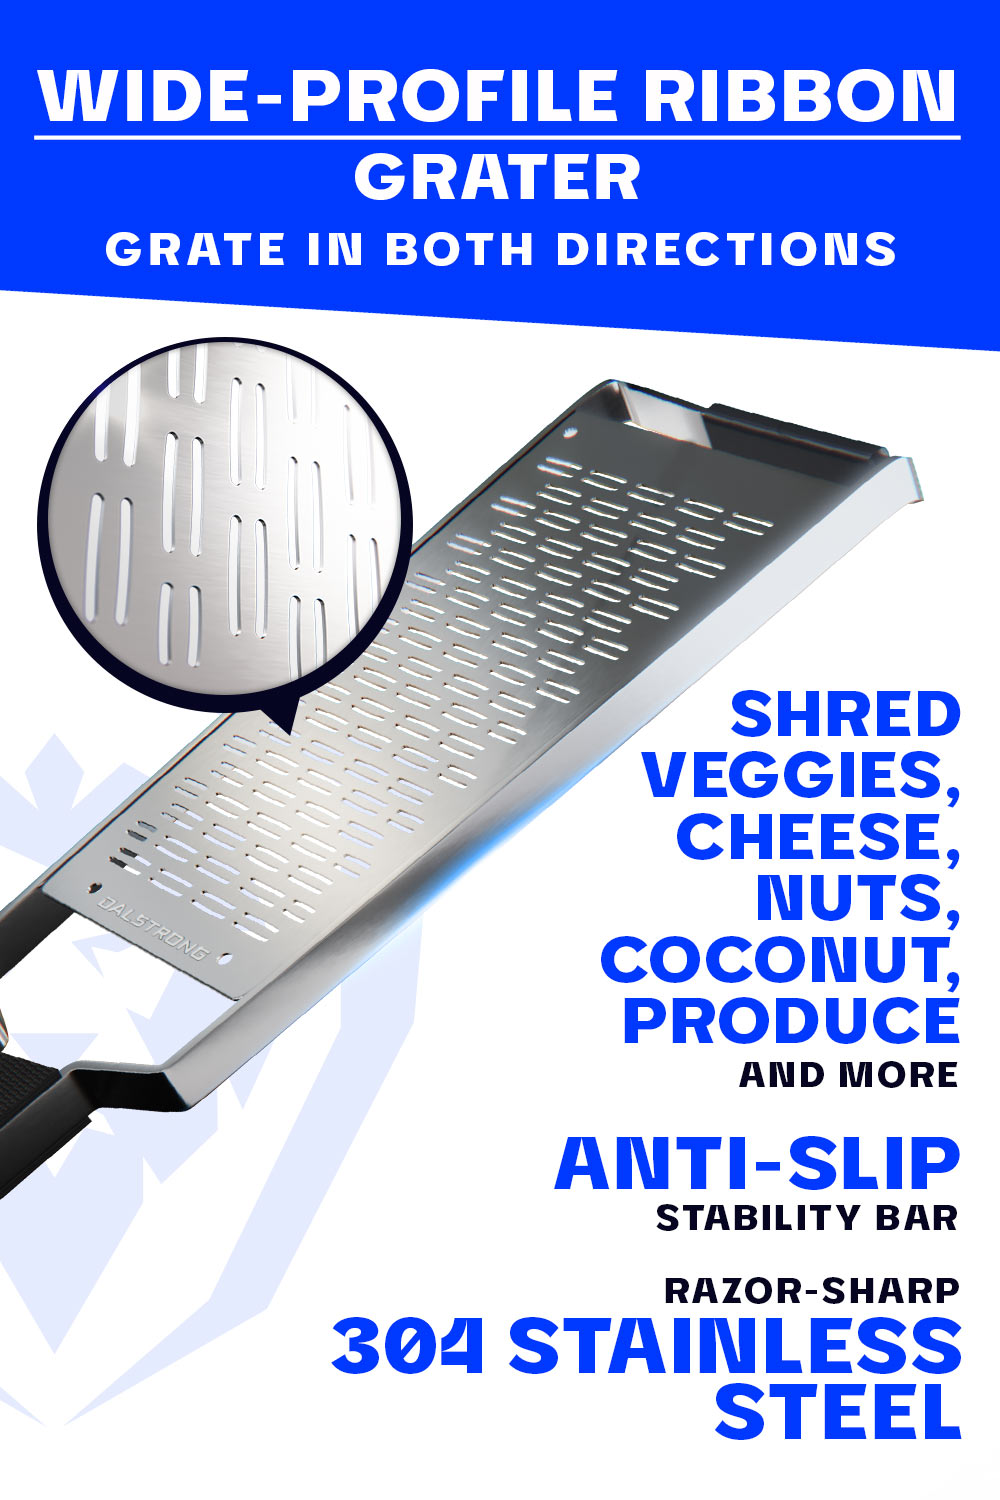 Dalstrong professional ribbon wide cheese grater featuring it's stainless steel wide ribbon grater.